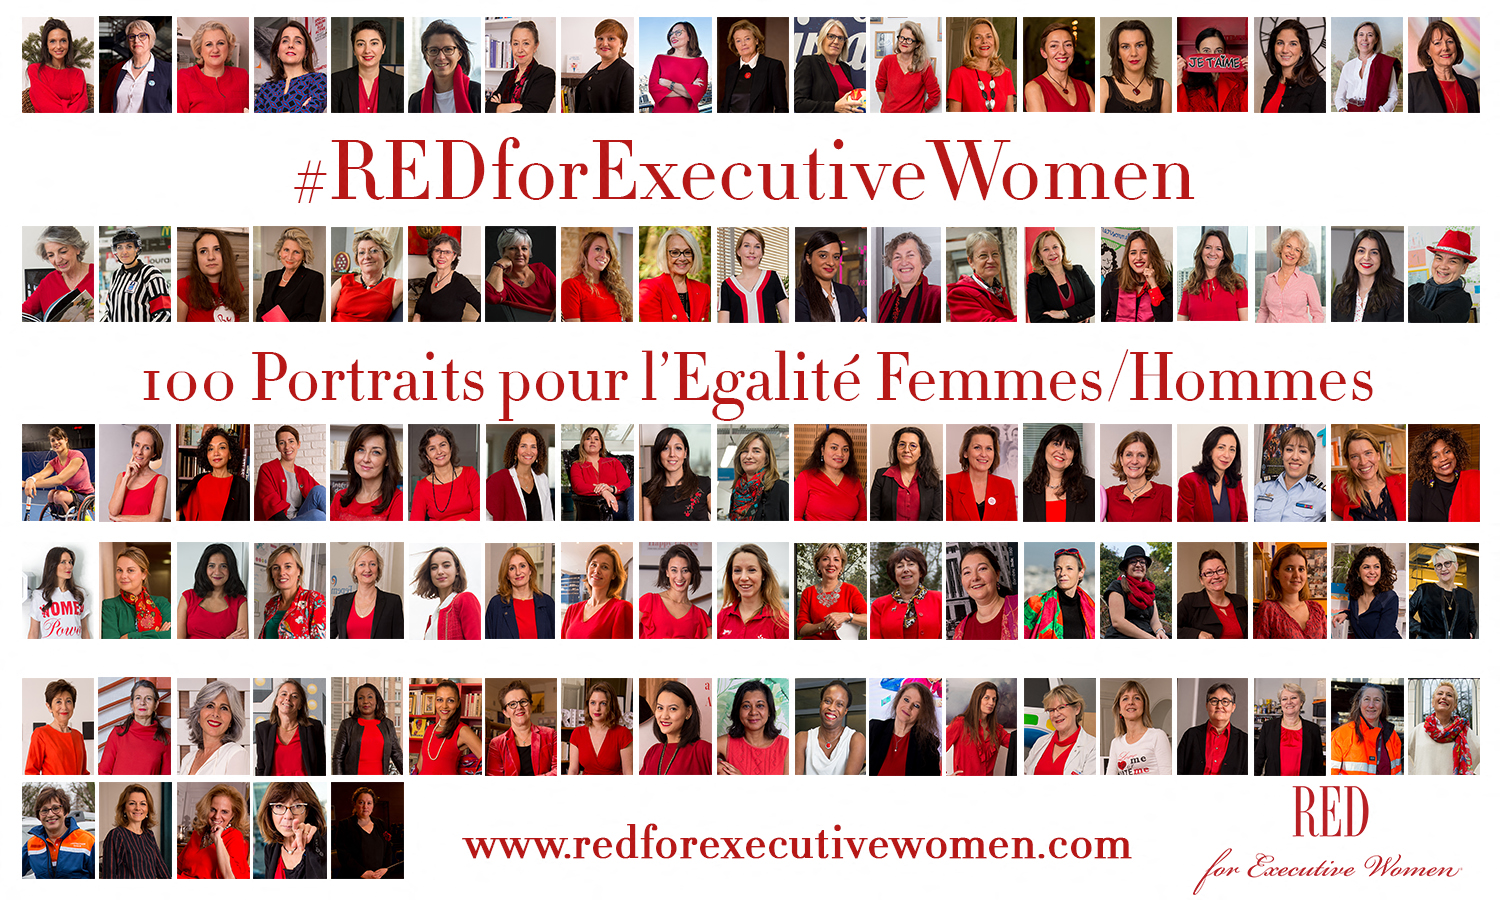 Portrait of the 100 Executive Women who participated in the RED for Executive Women® project.